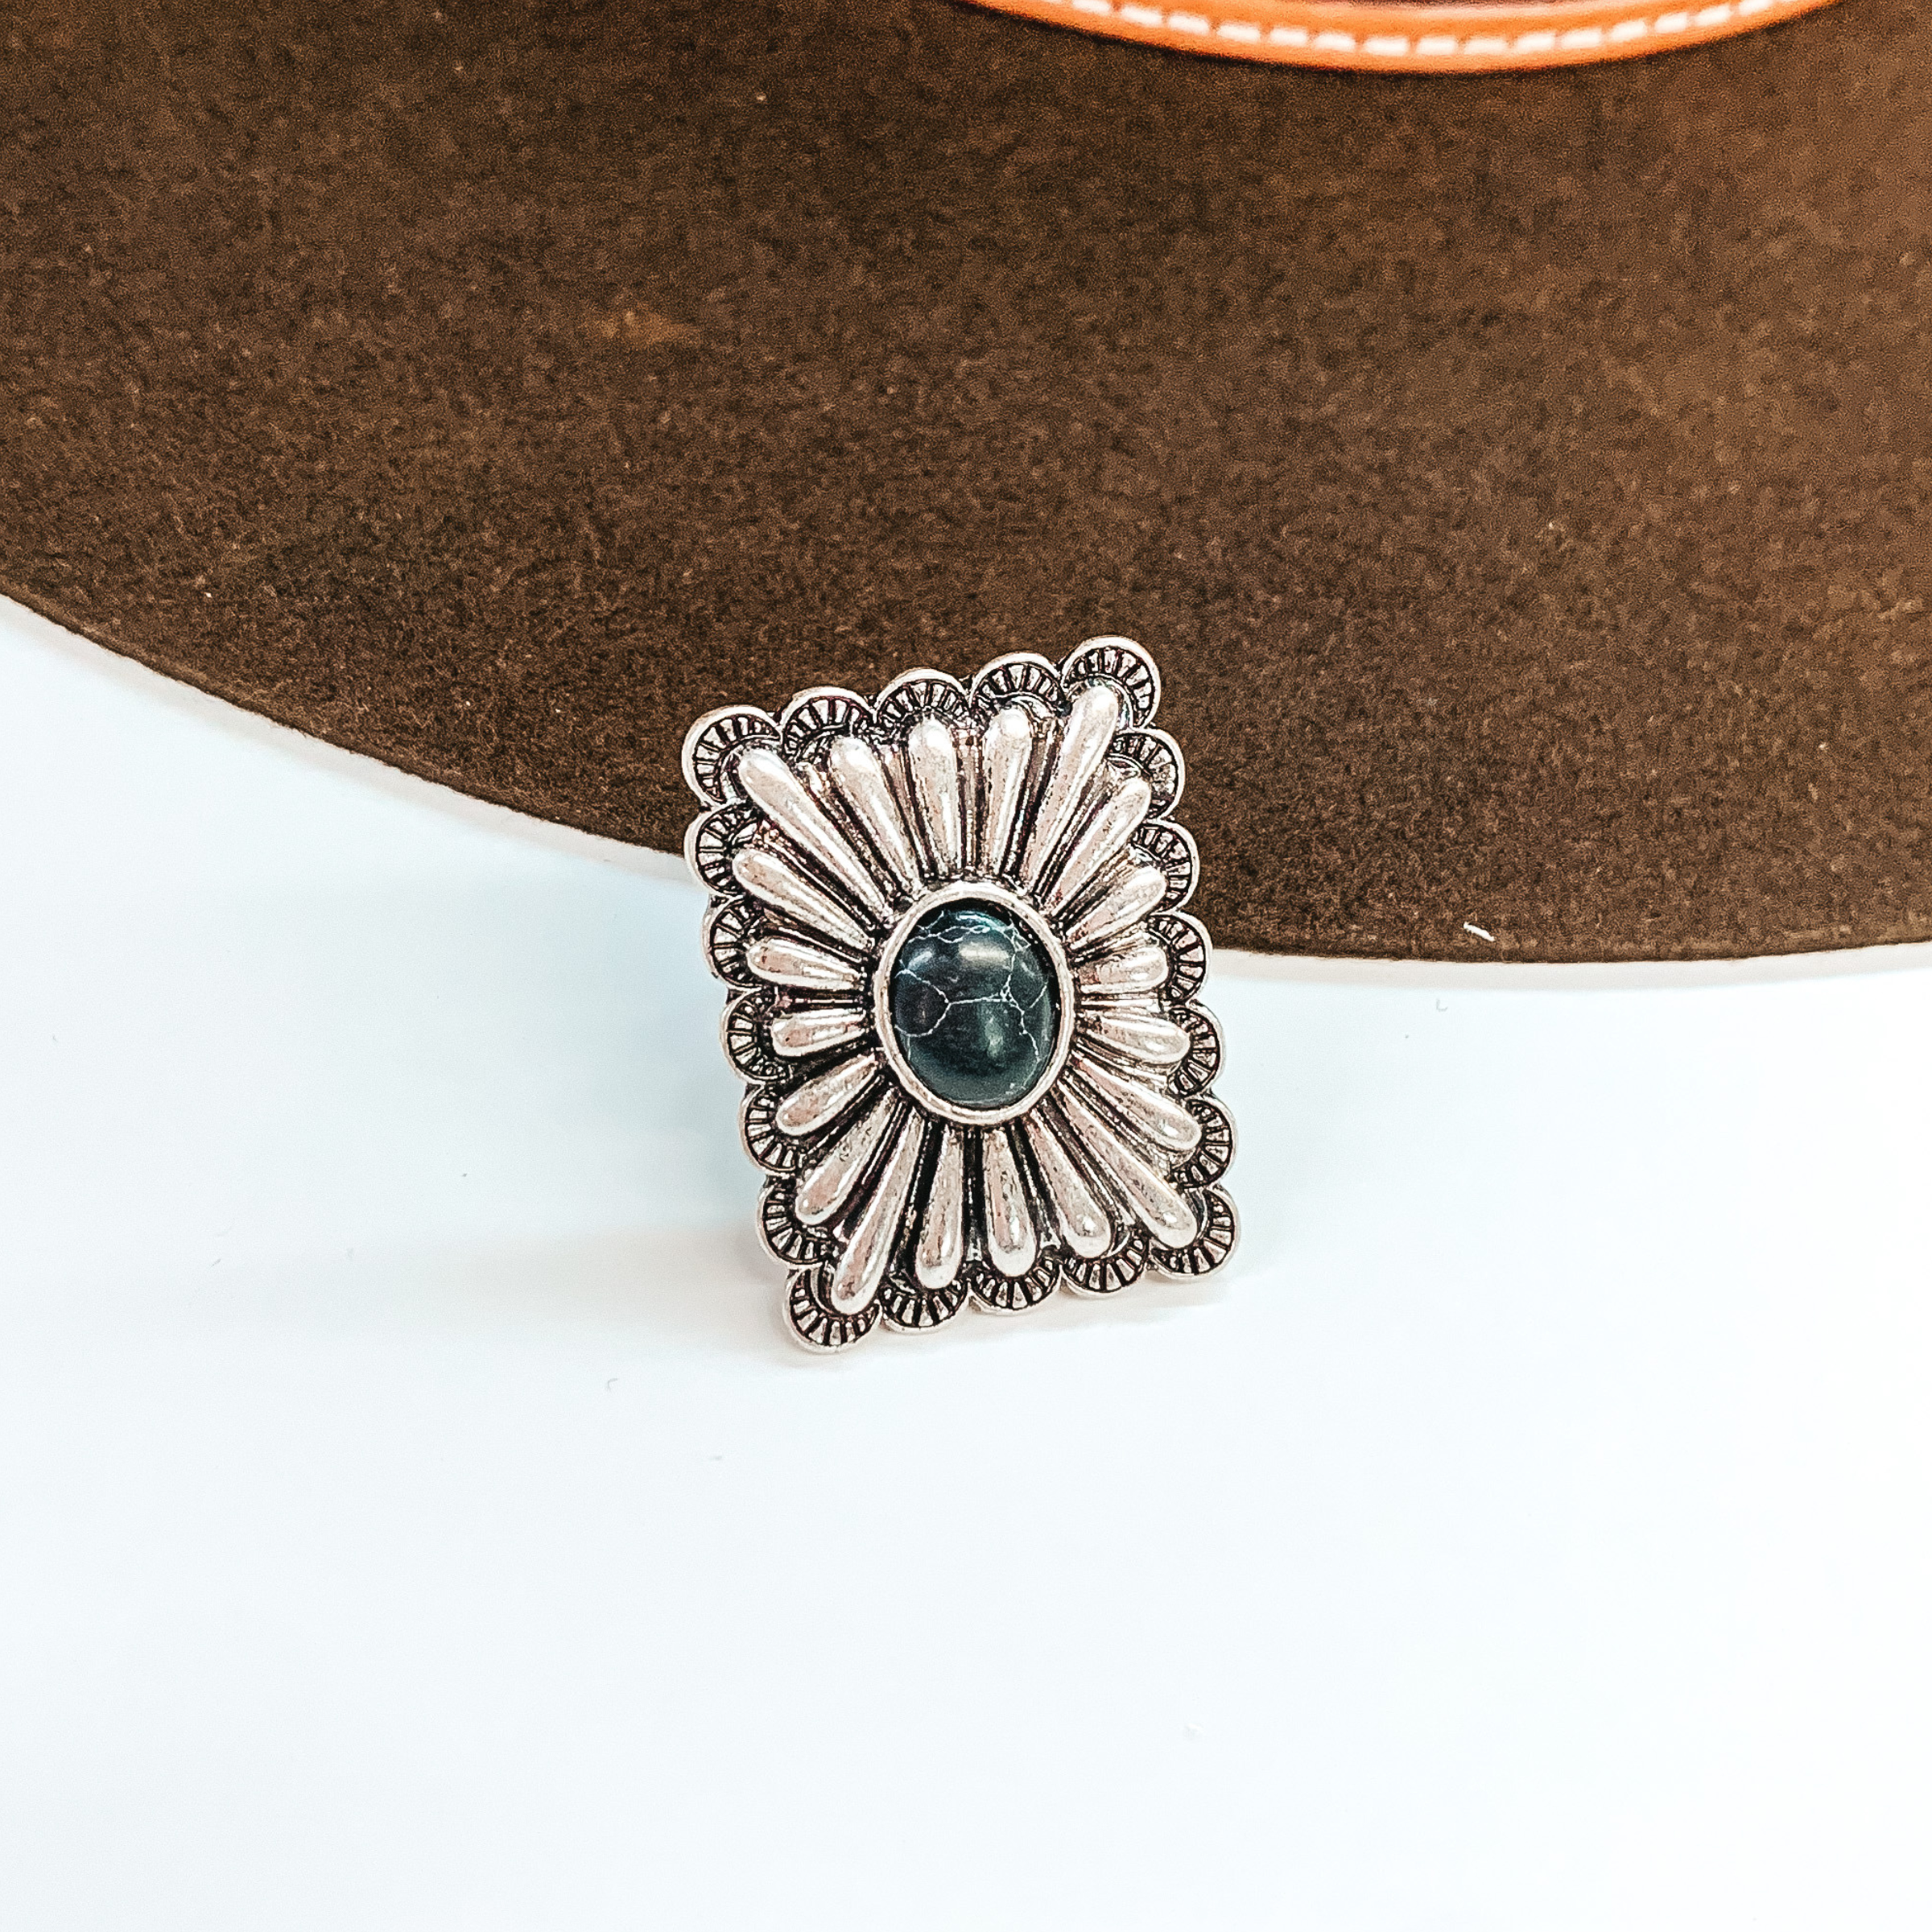 Silver, square concho ring with a center black stone. This ring is pictured in front of a brown hat on a white background.